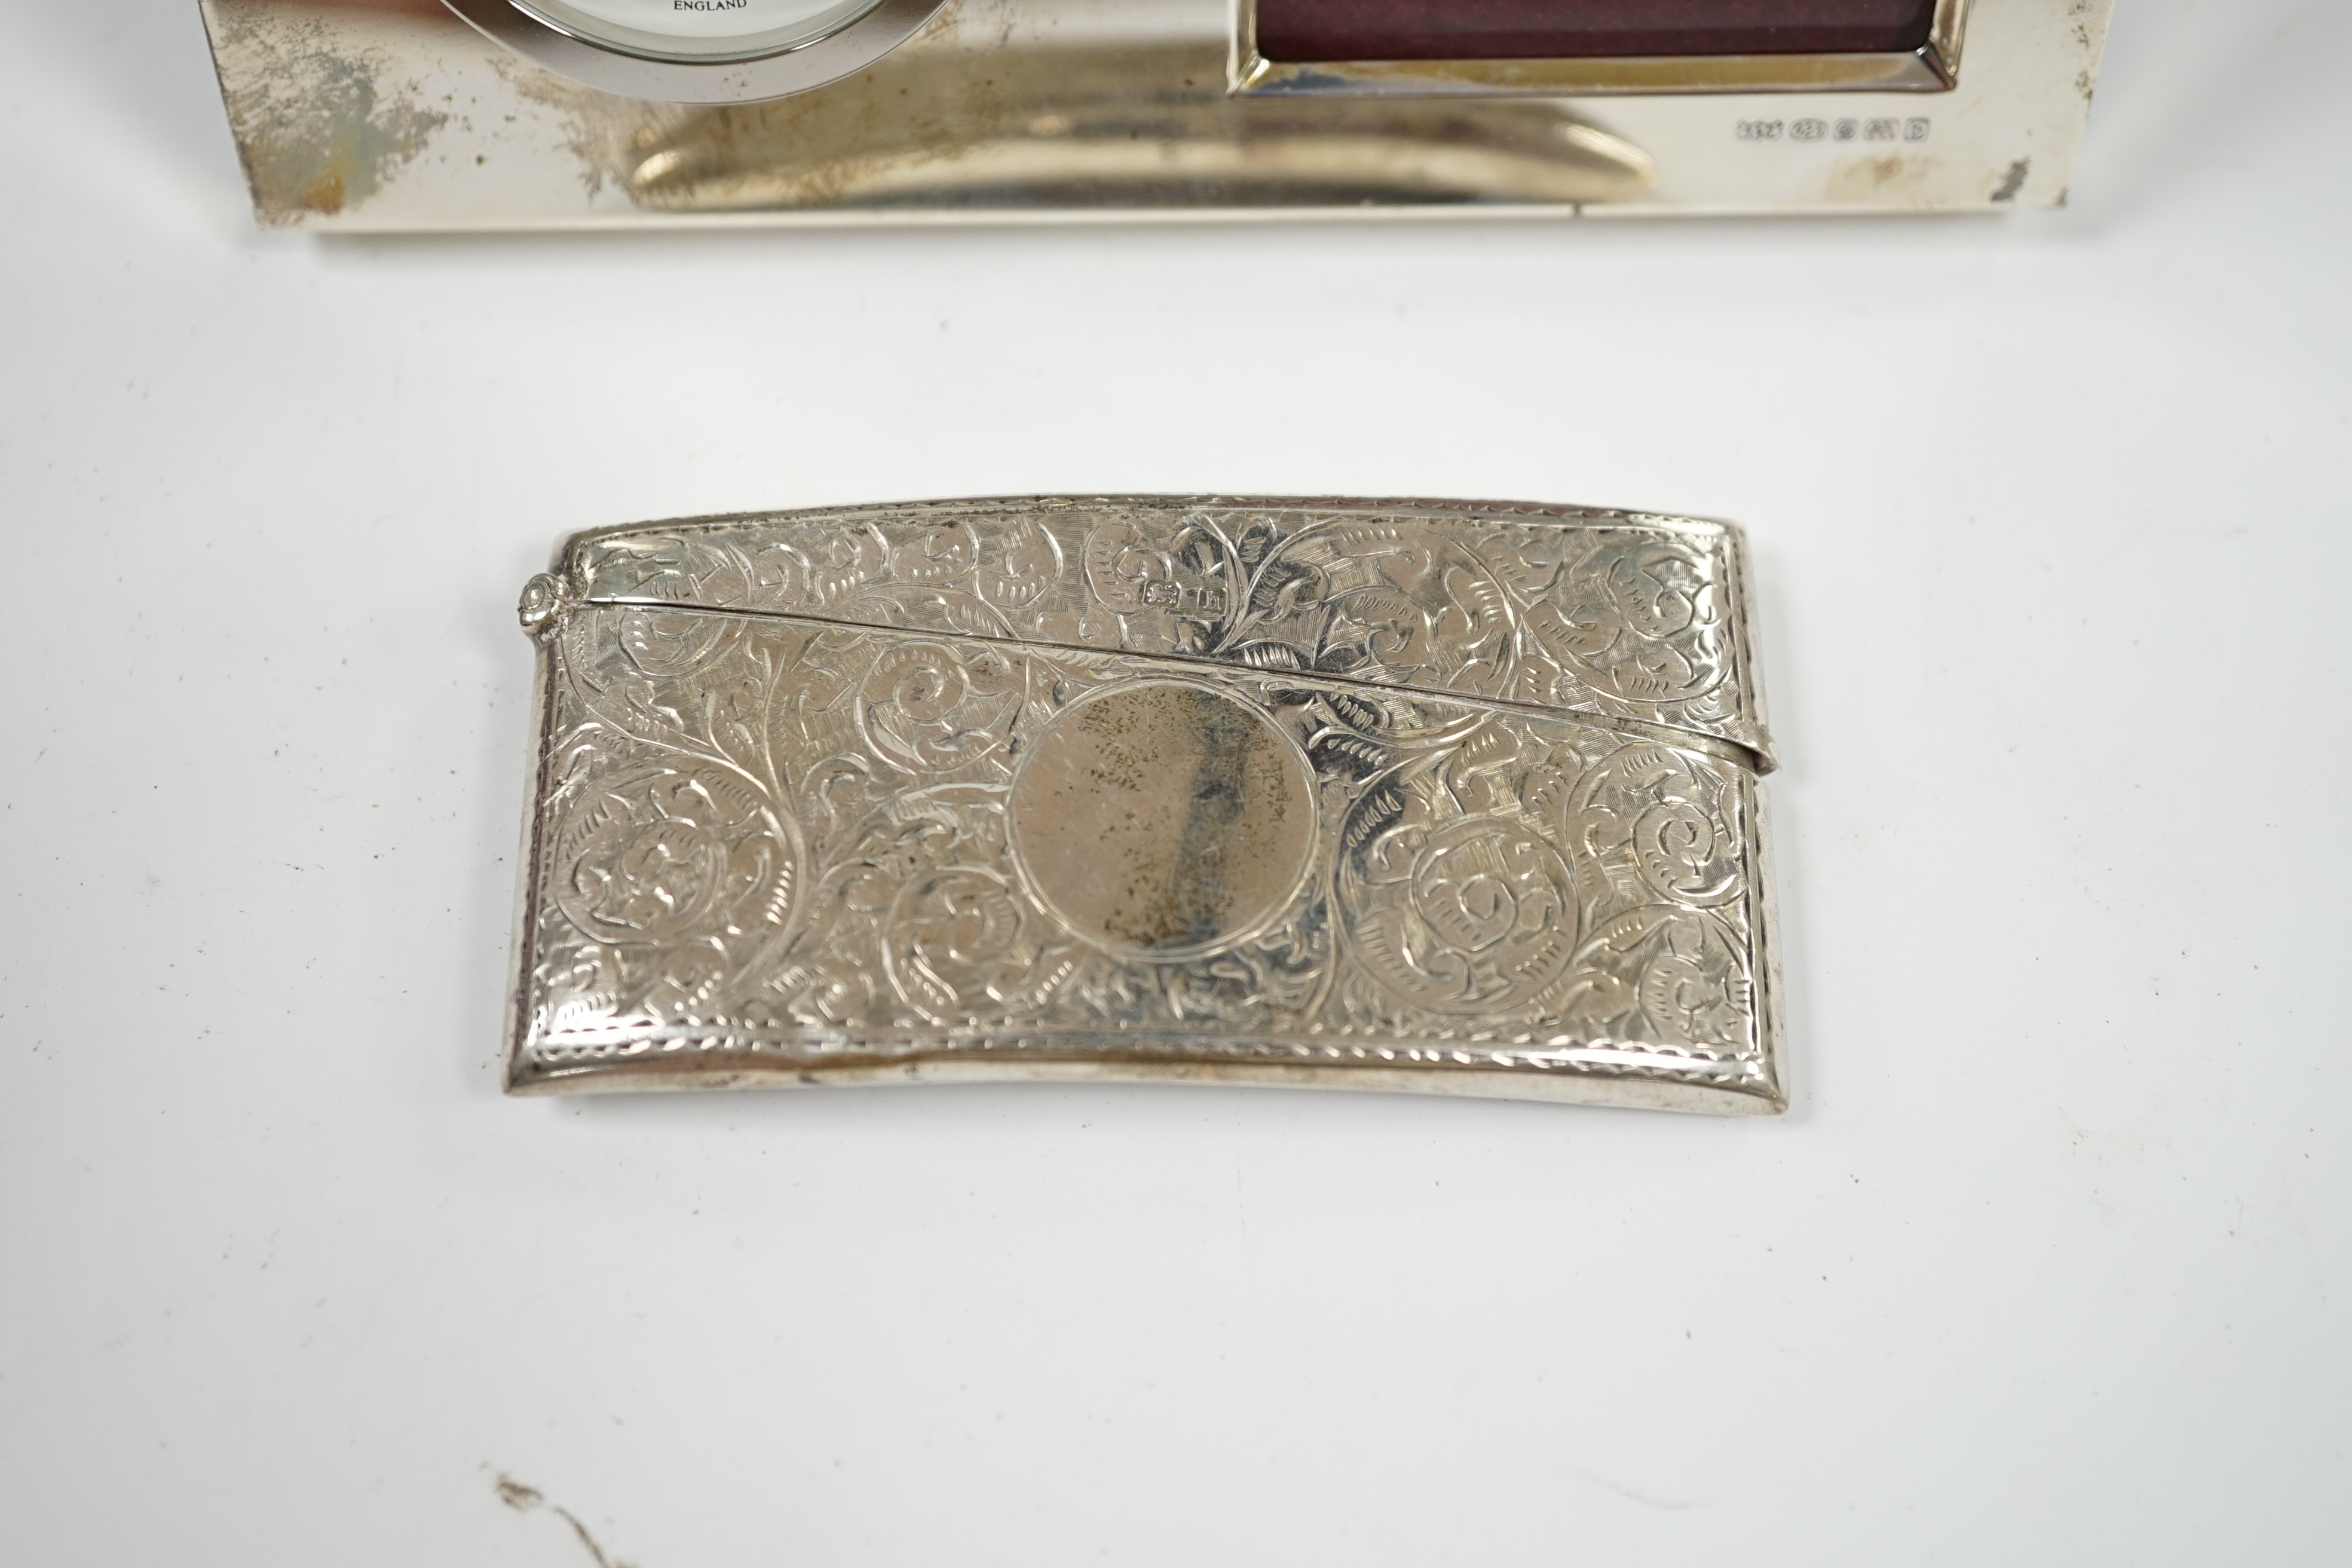 An Edwardian engraved silver card case, Birmingham, 1907, 82mm and a modern silver desk timepiece. Condition - poor to fair